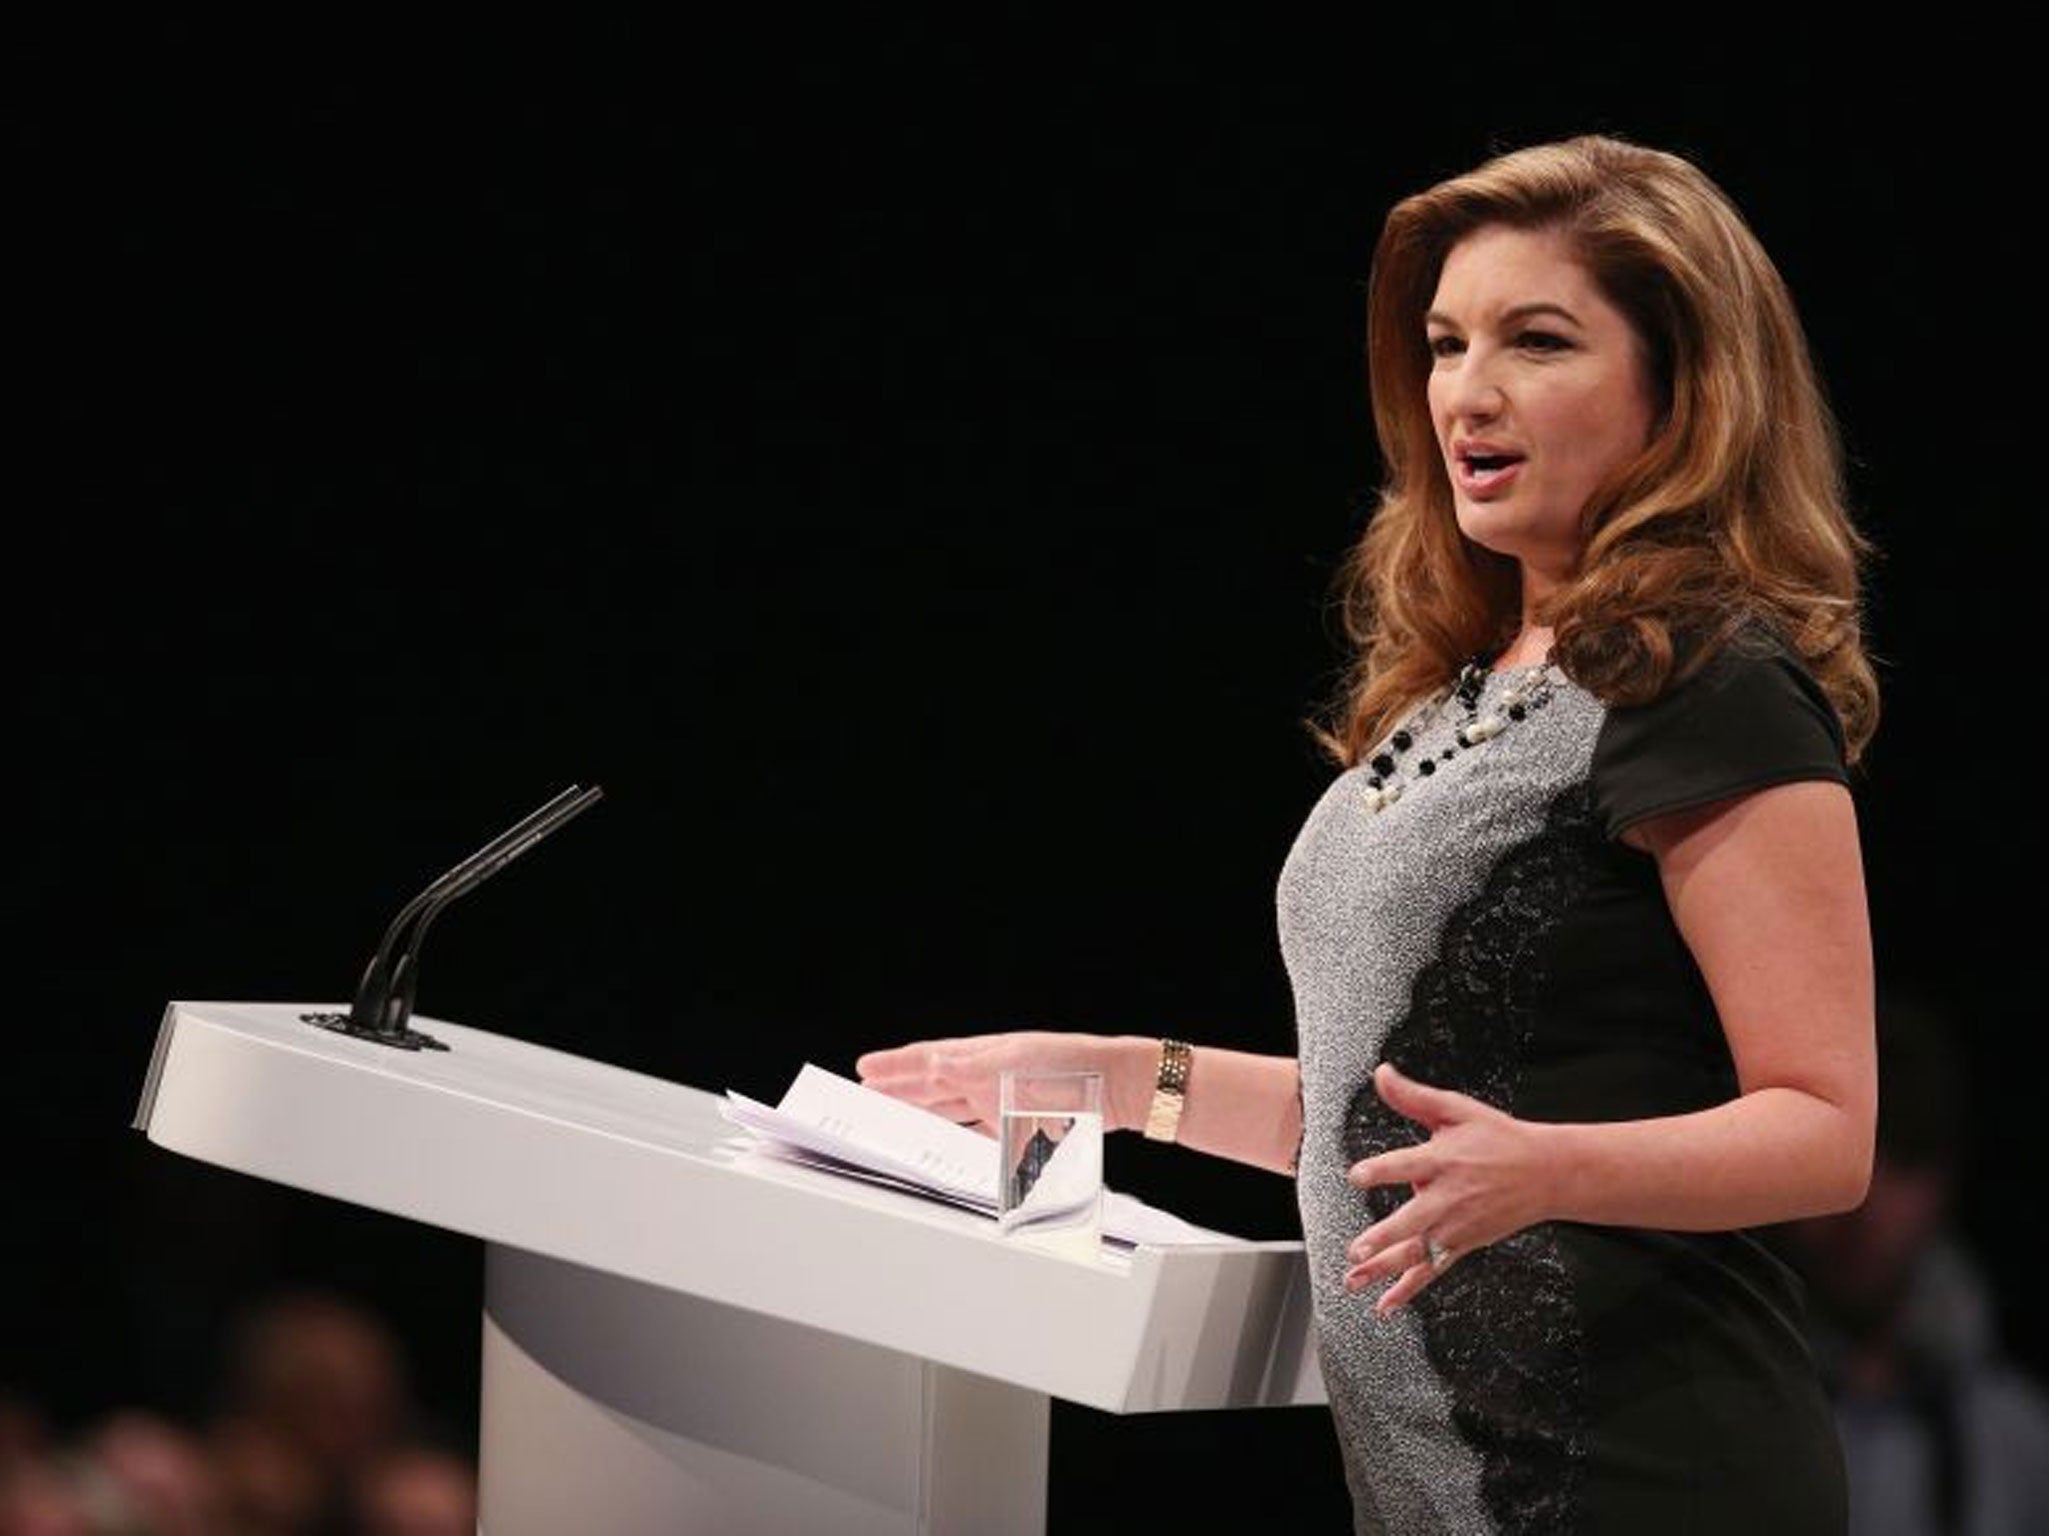 The prime minister has already made Karren Brady his small-business czar and the latest word from Westminster is that she will also be given a peerage